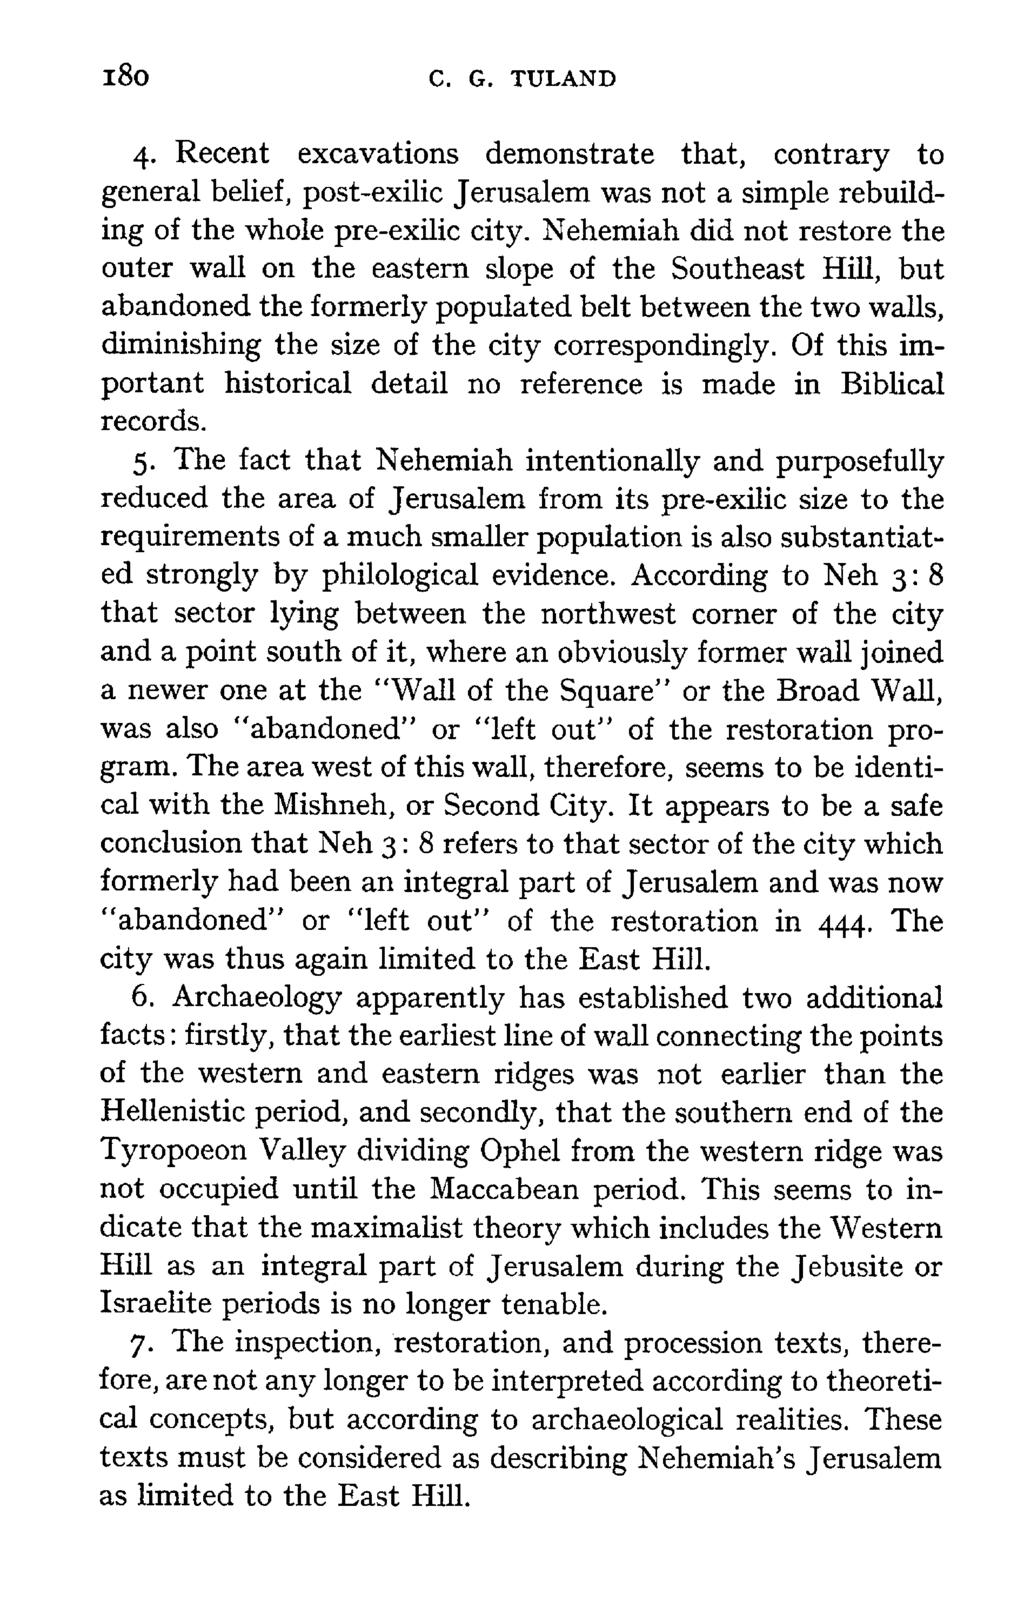 180 C. G. TULAND 4. Recent excavations demonstrate that, contrary to general belief, post-exilic Jerusalem was not a simple rebuilding of the whole pre-exilic city.